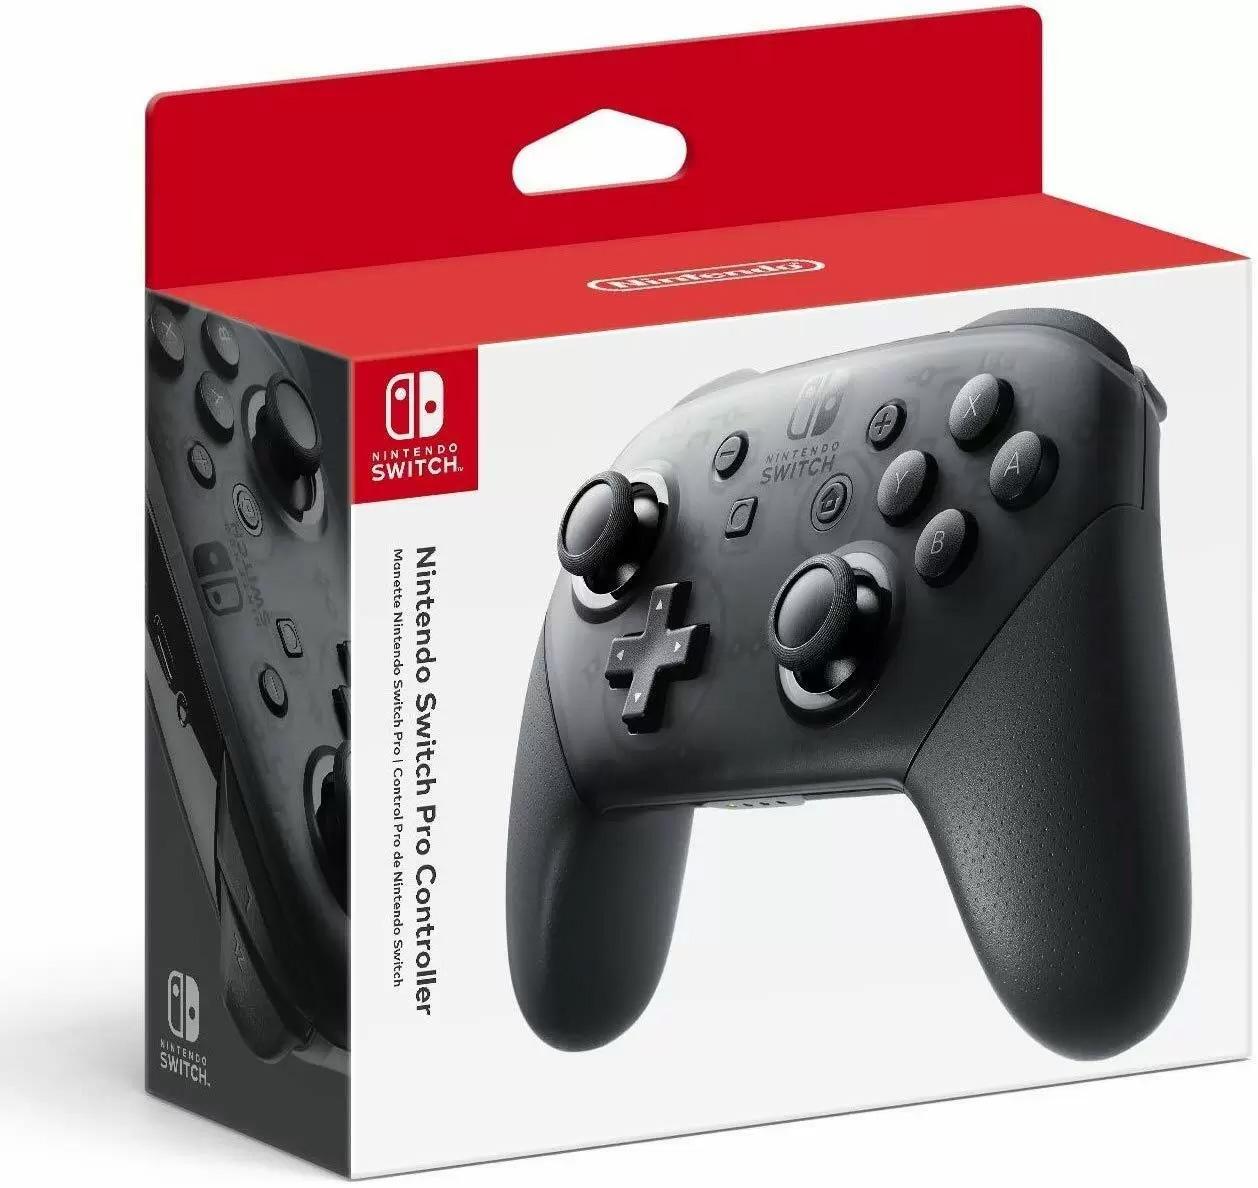 Nintendo Switch Pro Controller for $59 Shipped